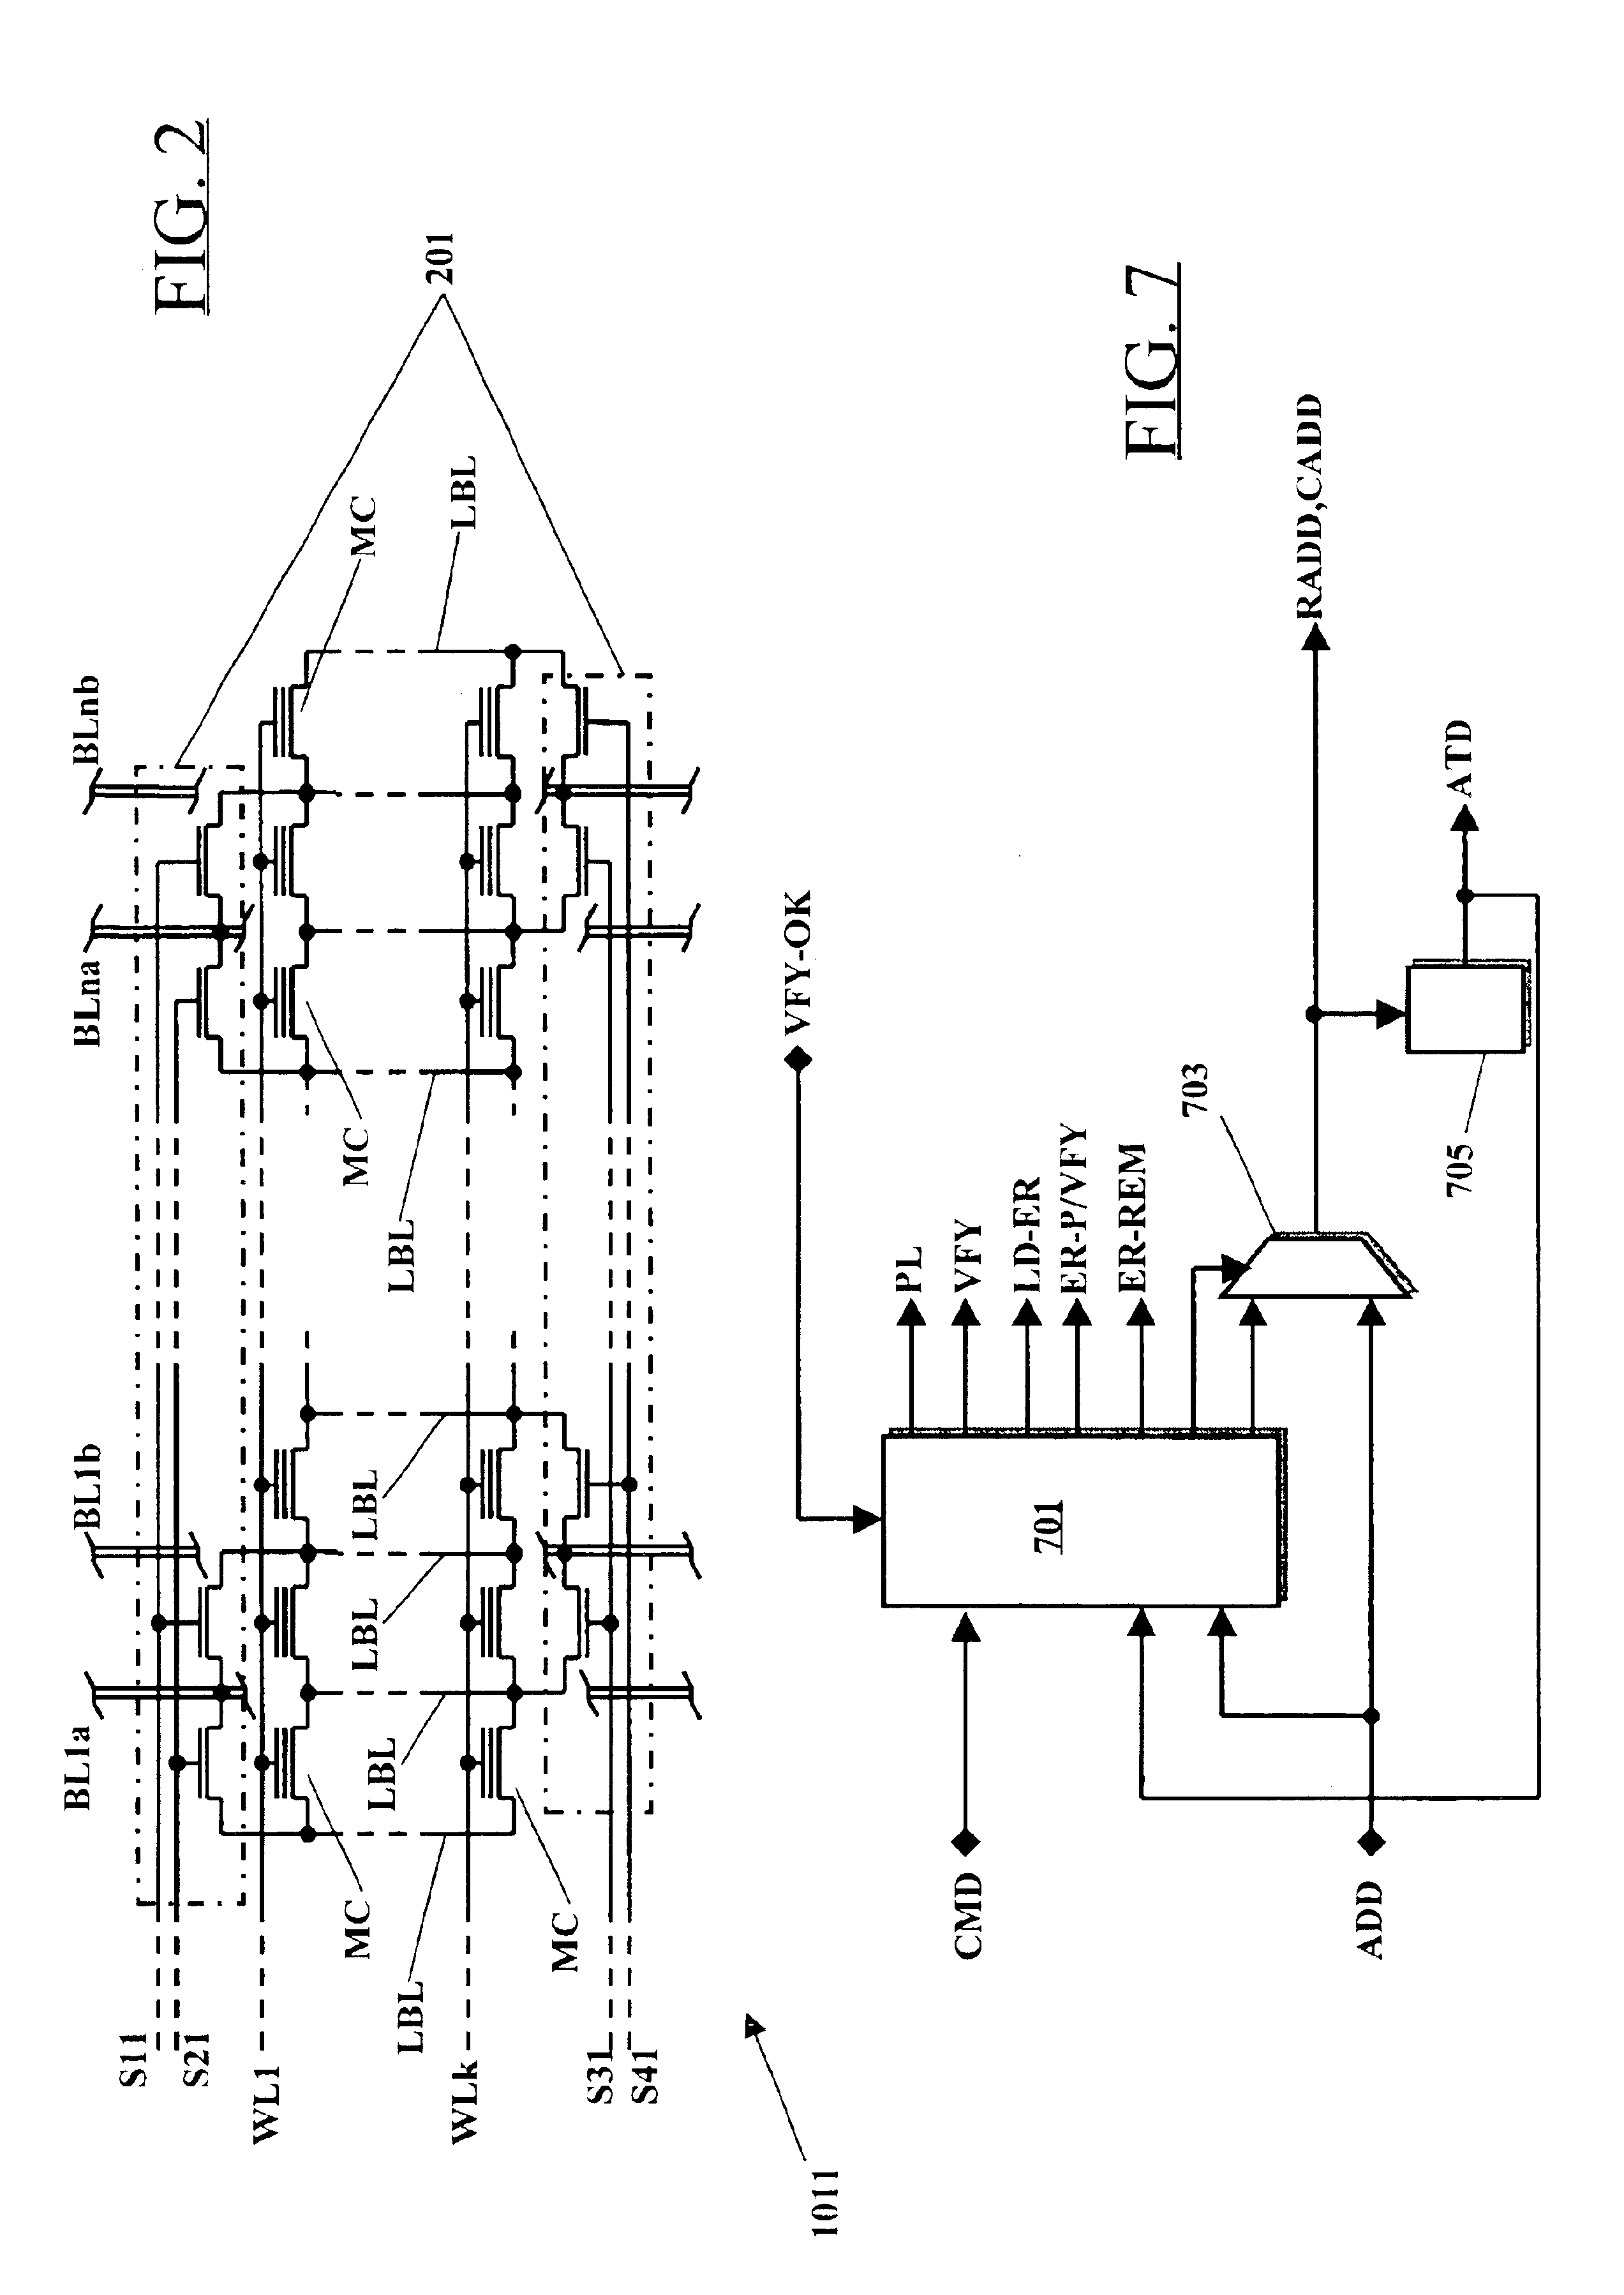 Line selector for a matrix of memory elements